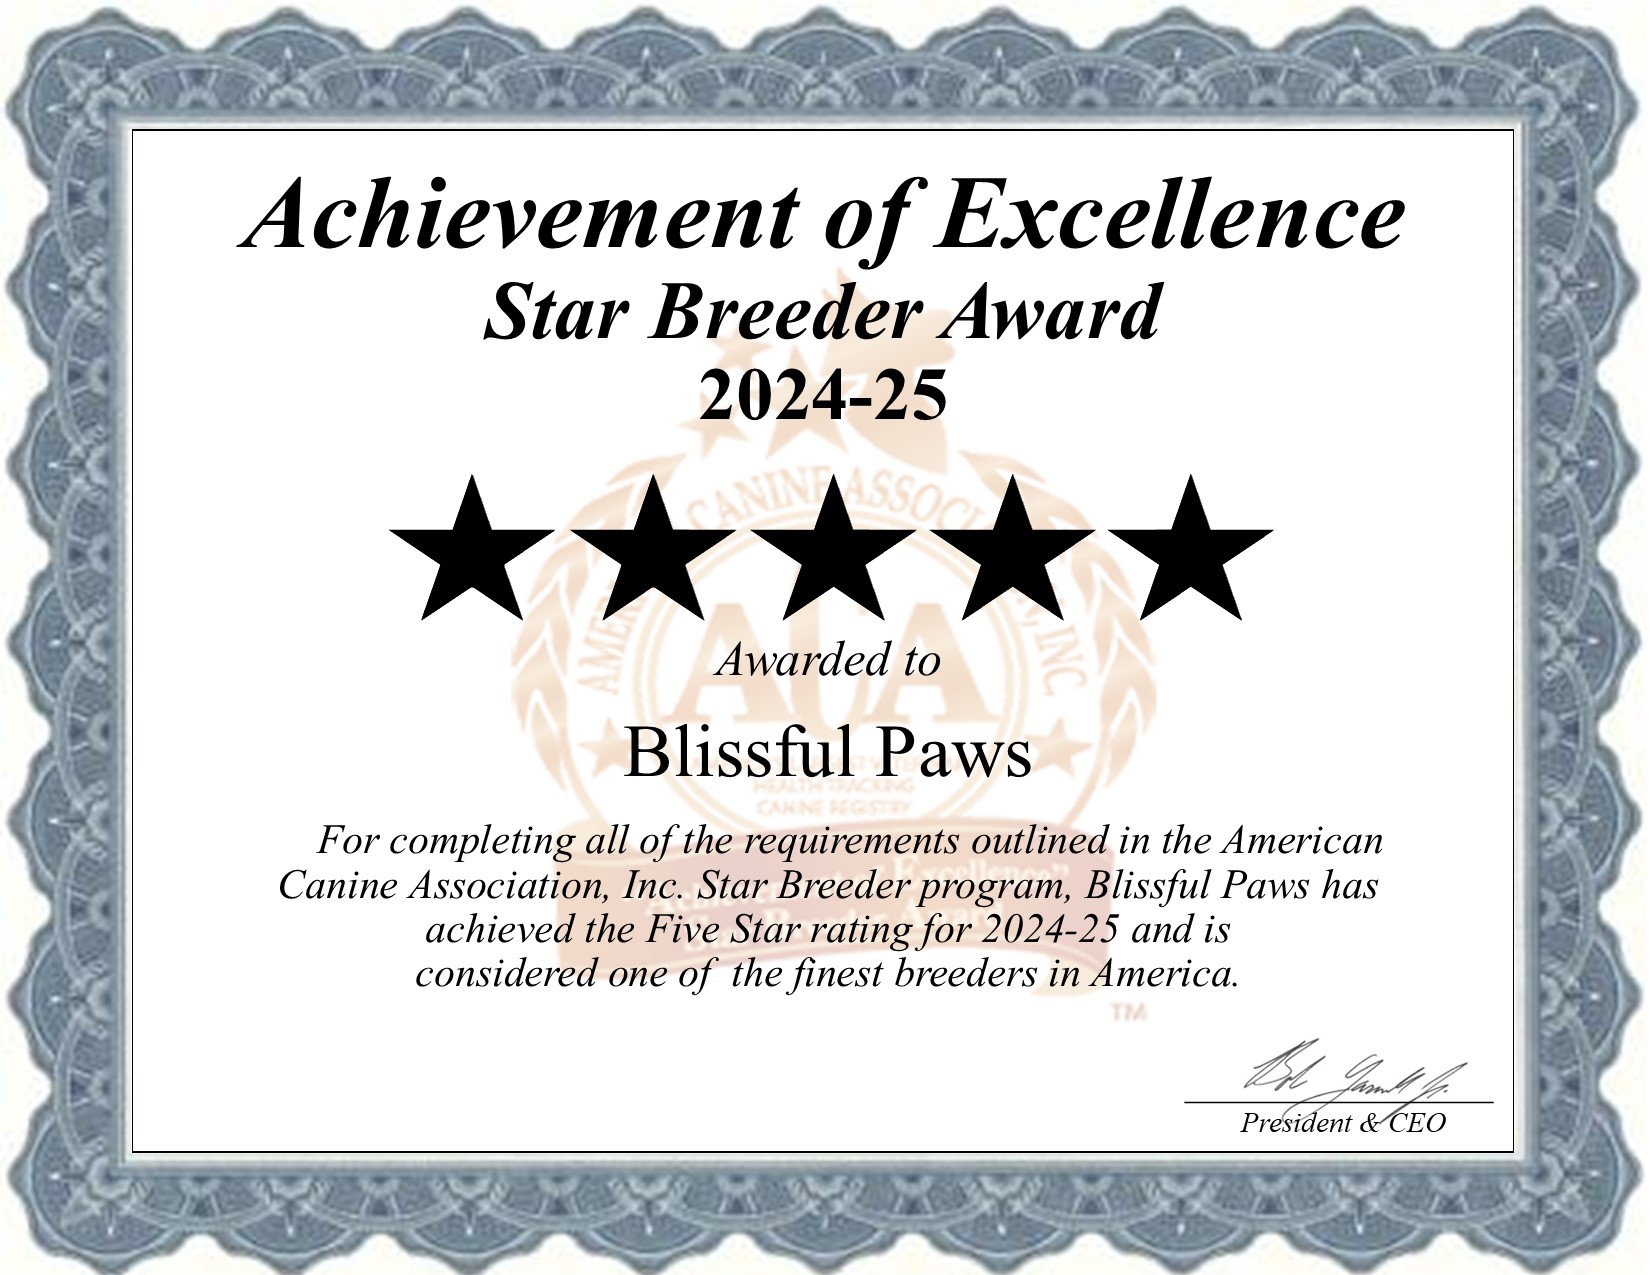 Blissful, Paws, dog, breeder, star, certificate, Blissful-Paws, New Providence, PA, Pennsylvania, puppy, dog, kennels, mill, puppymill, usda, 5-star, aca, ica, registered, Golden Retriever, none